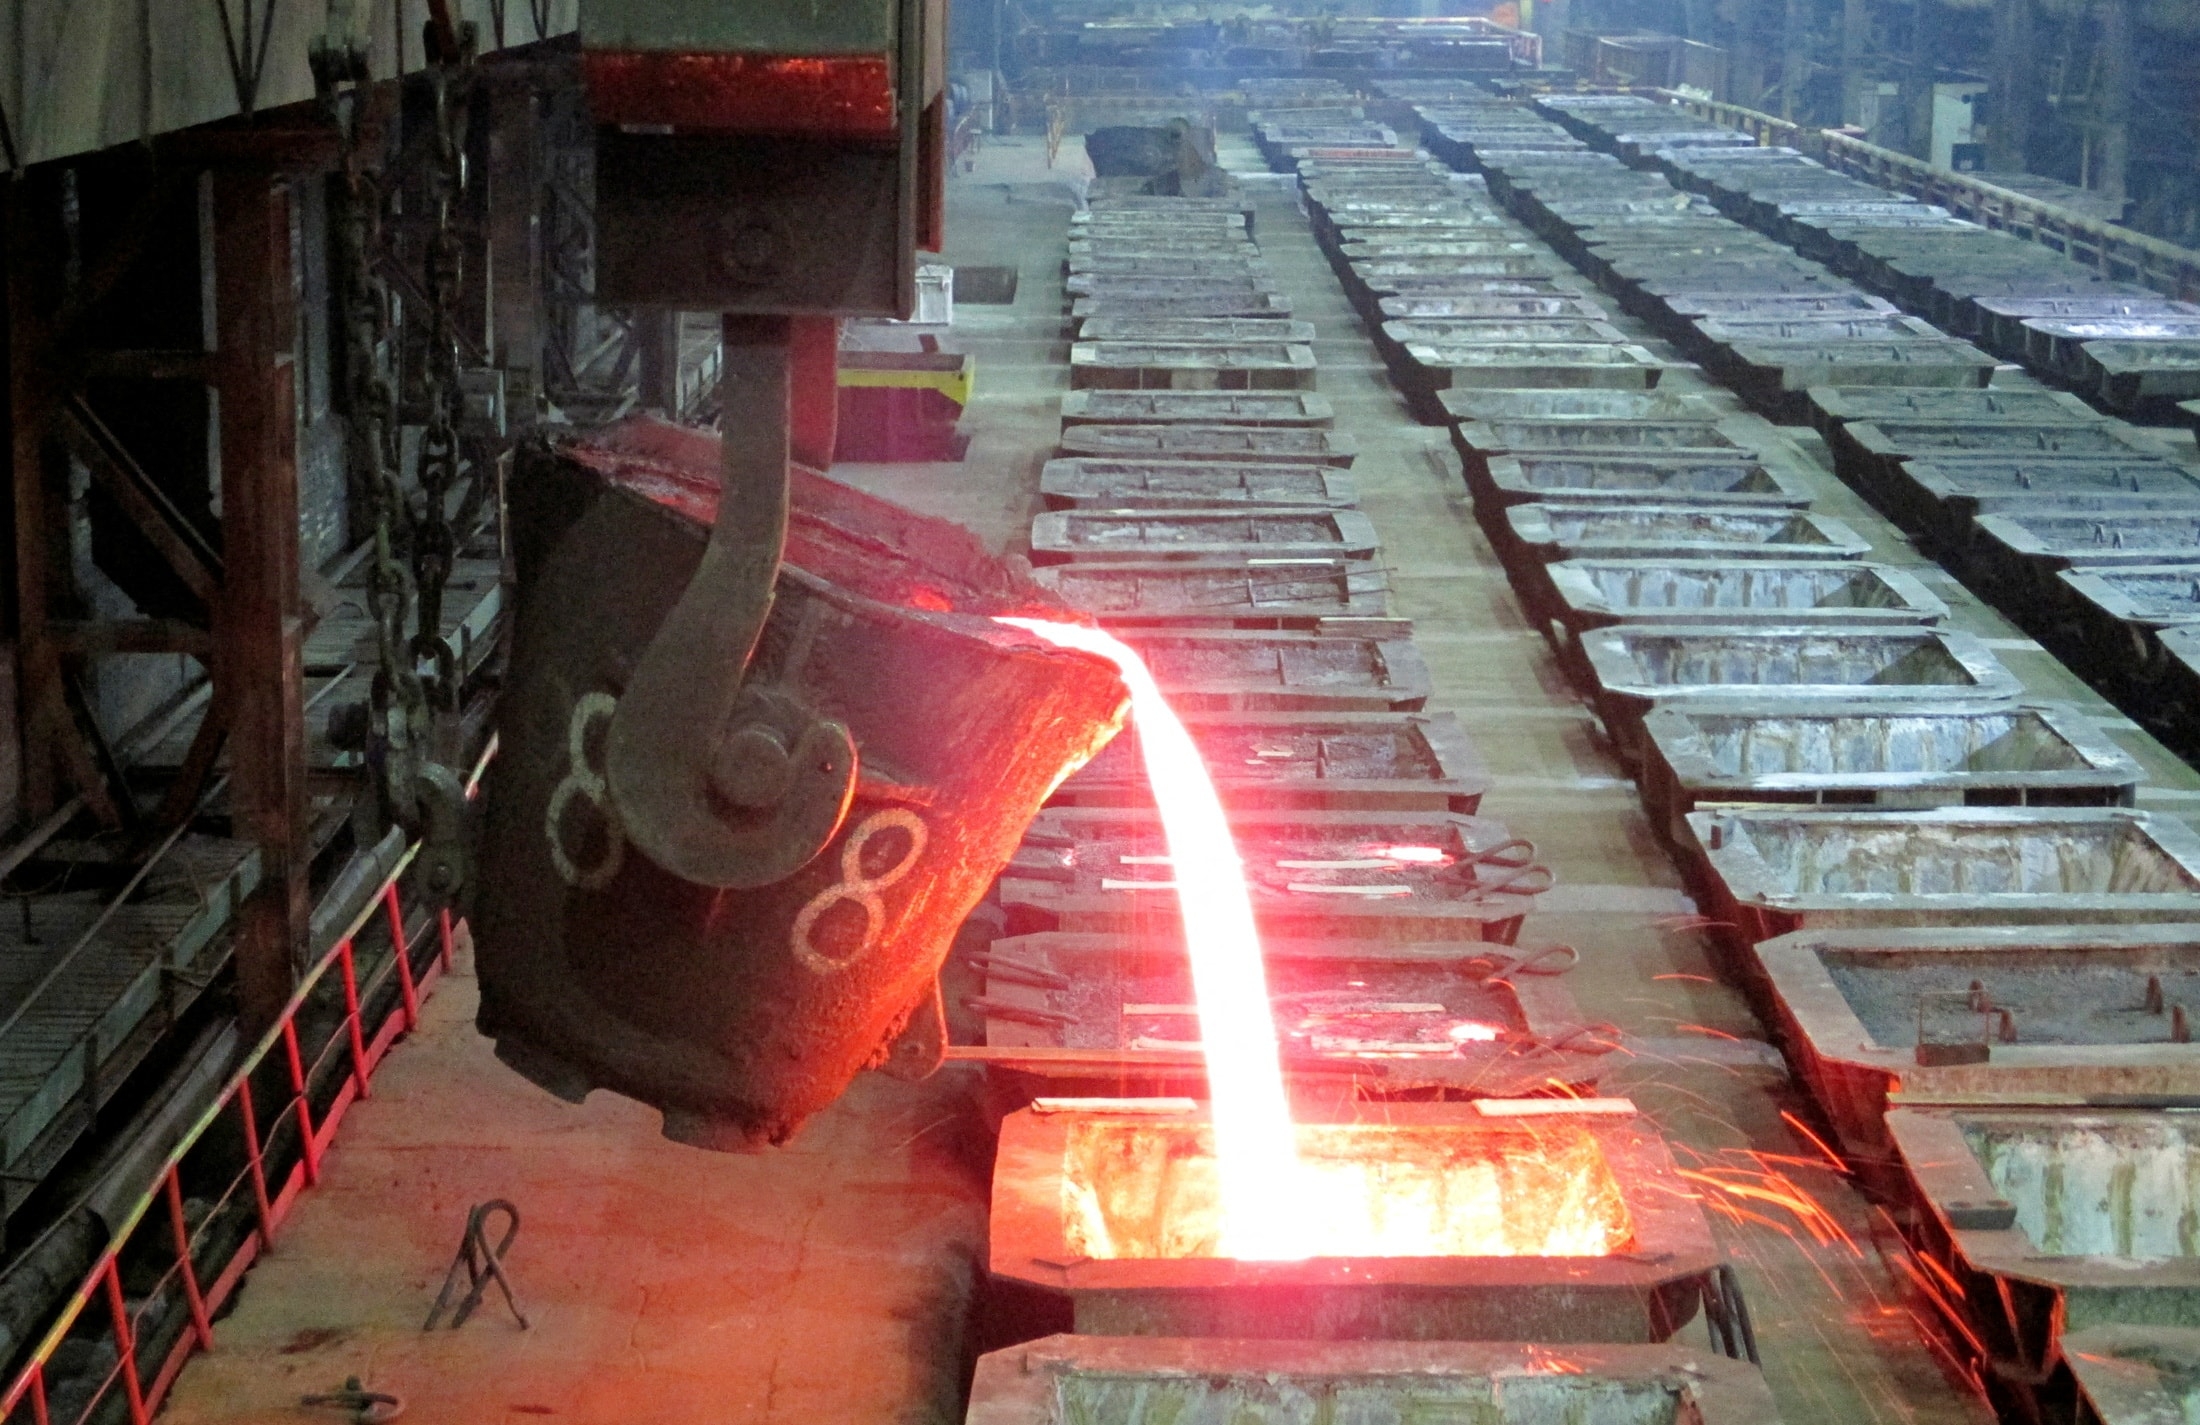 Metals &amp; Mining: Prices of coking coal, iron ore and steel have surged sharply. As per the brokerage, domestic steel price hikes, so far, are insufficient to cover cost inflation, however, the consumption lag suggests higher margins in Q4FY22E. High steel prices would lead to local demand destruction though partly compensated by higher exports, it added. It recommends buy on JSPL, NMDC and Tata Steel.